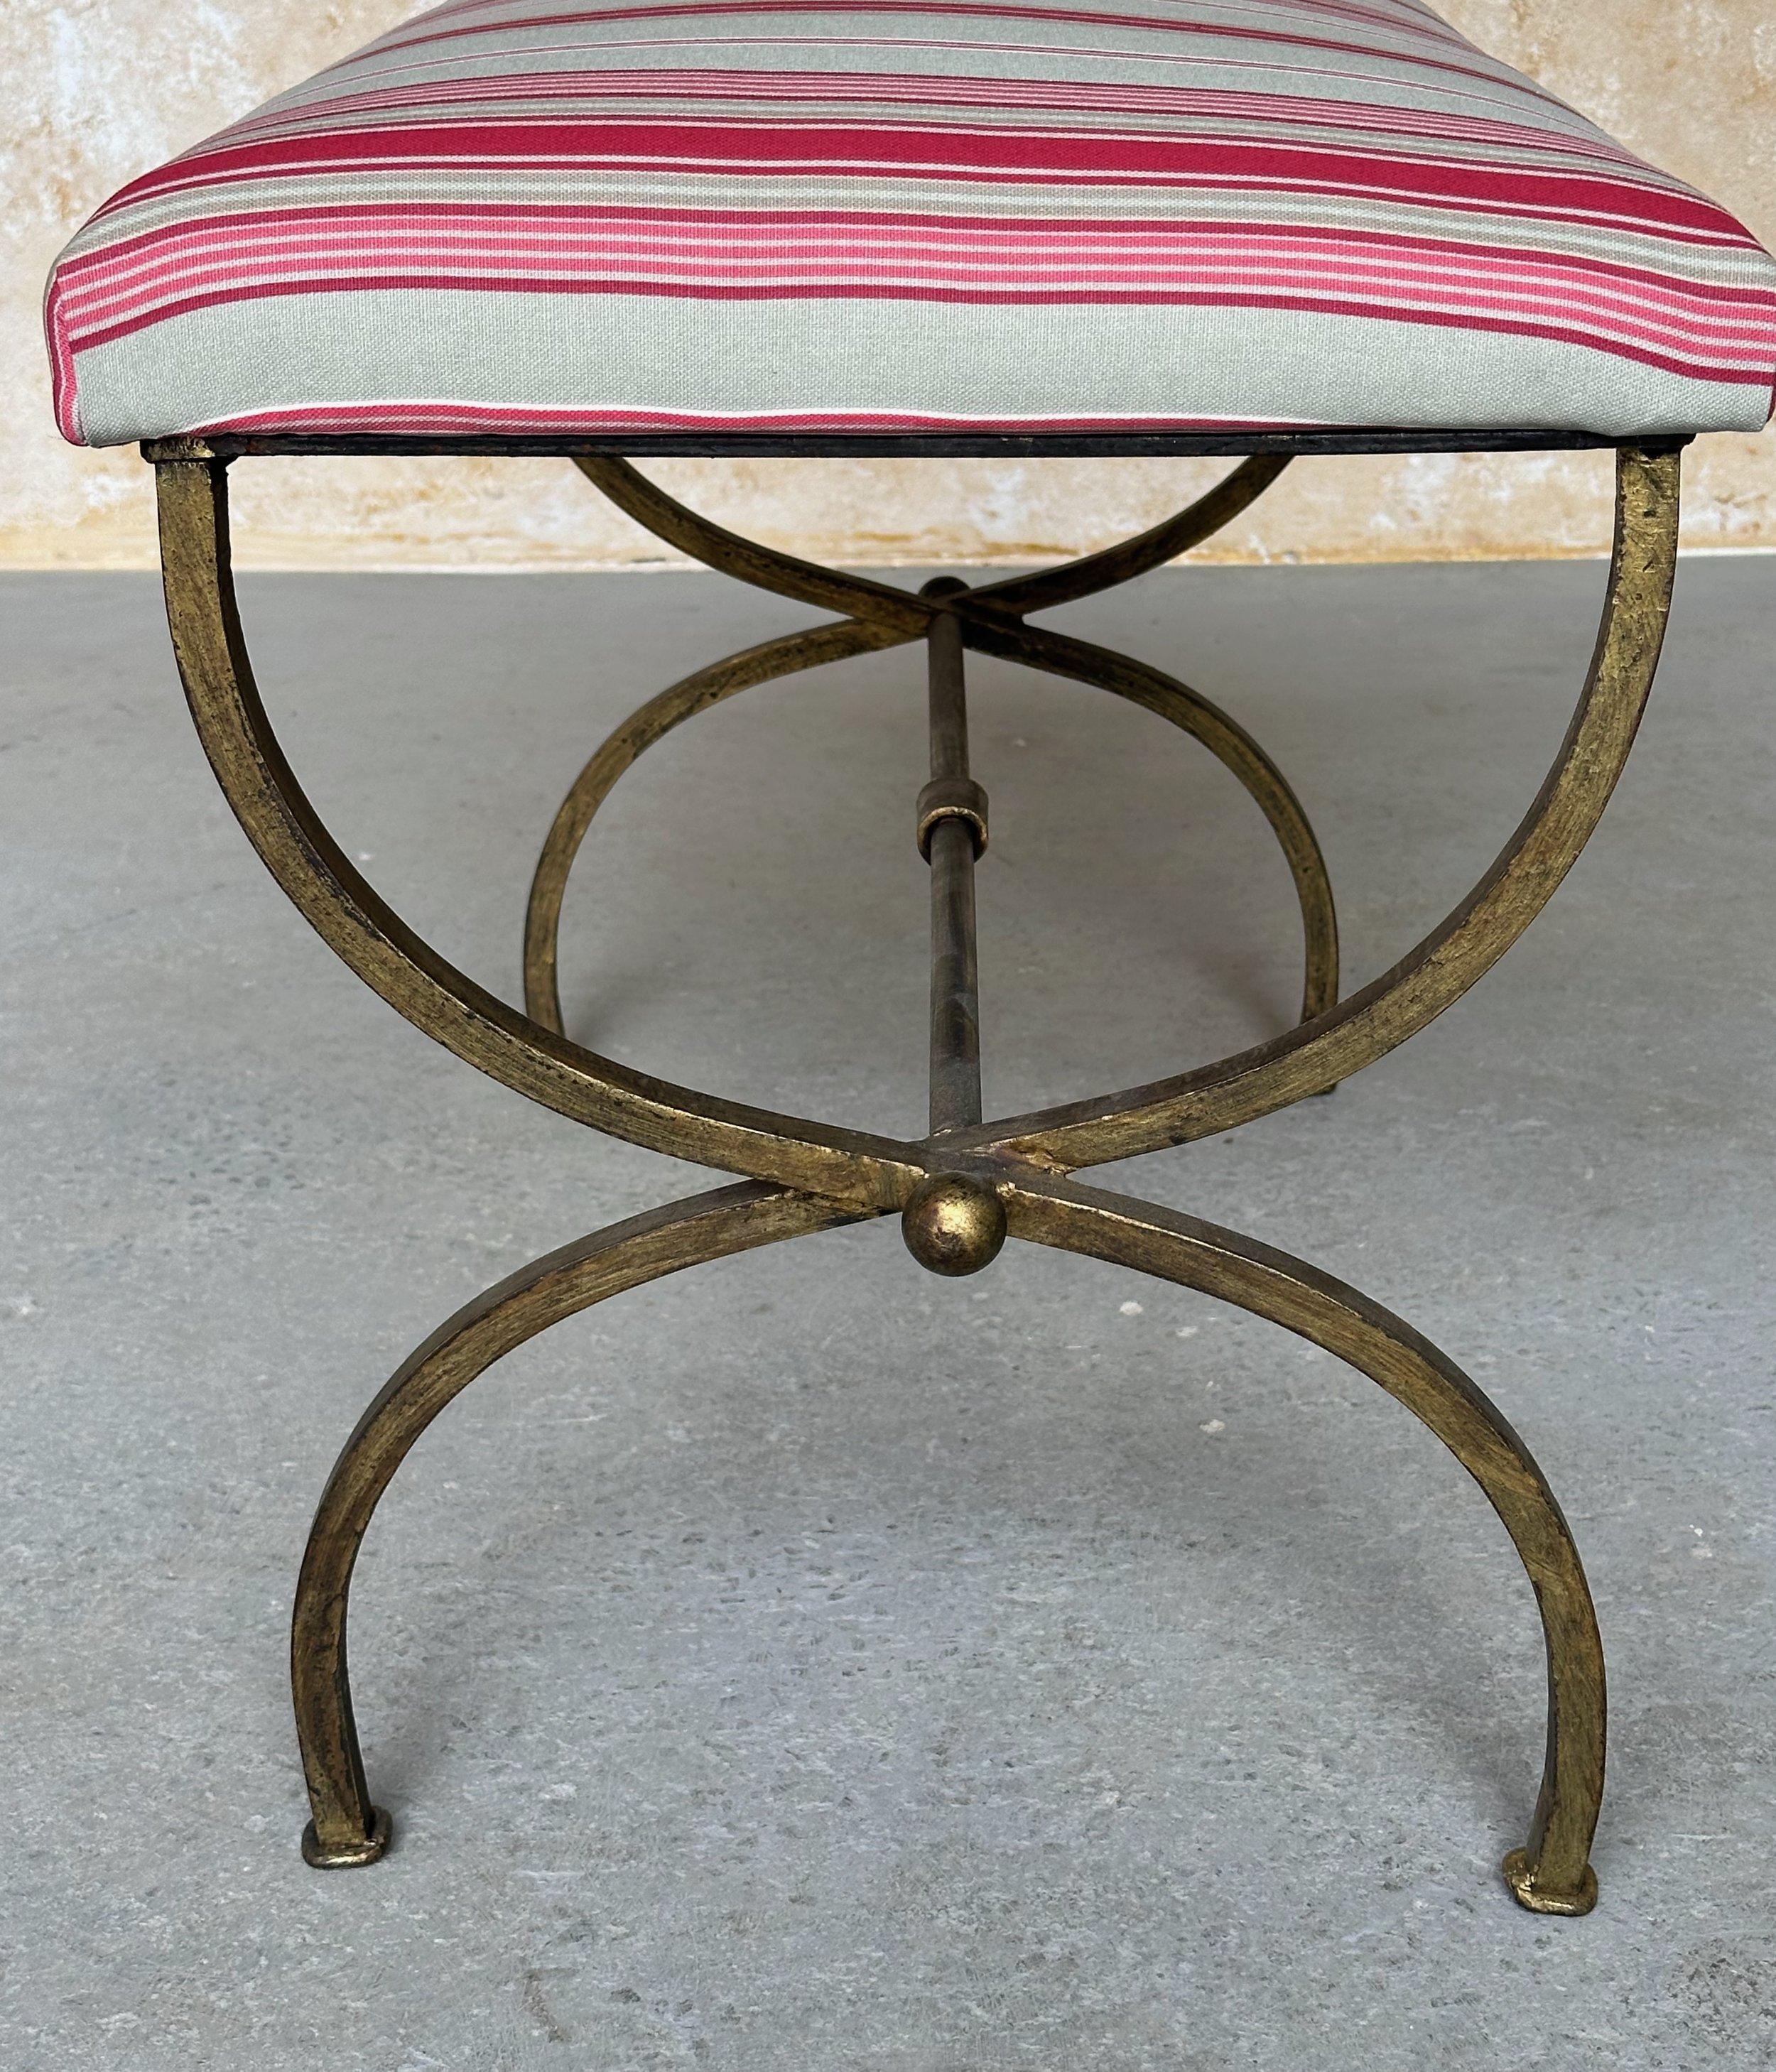 Hand-Crafted Spanish Iron Bench in Striped Fabric For Sale